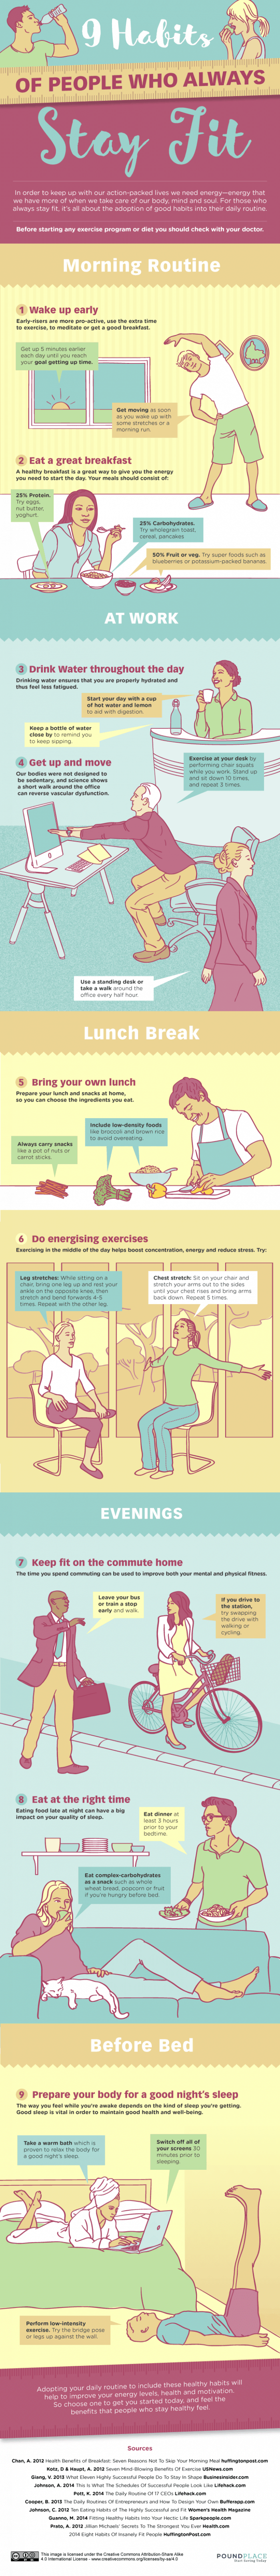 9 Habits of People Who Always Stay Fit. Morning Routine, At Work, Lunch Break, Evenings, Before Bed.